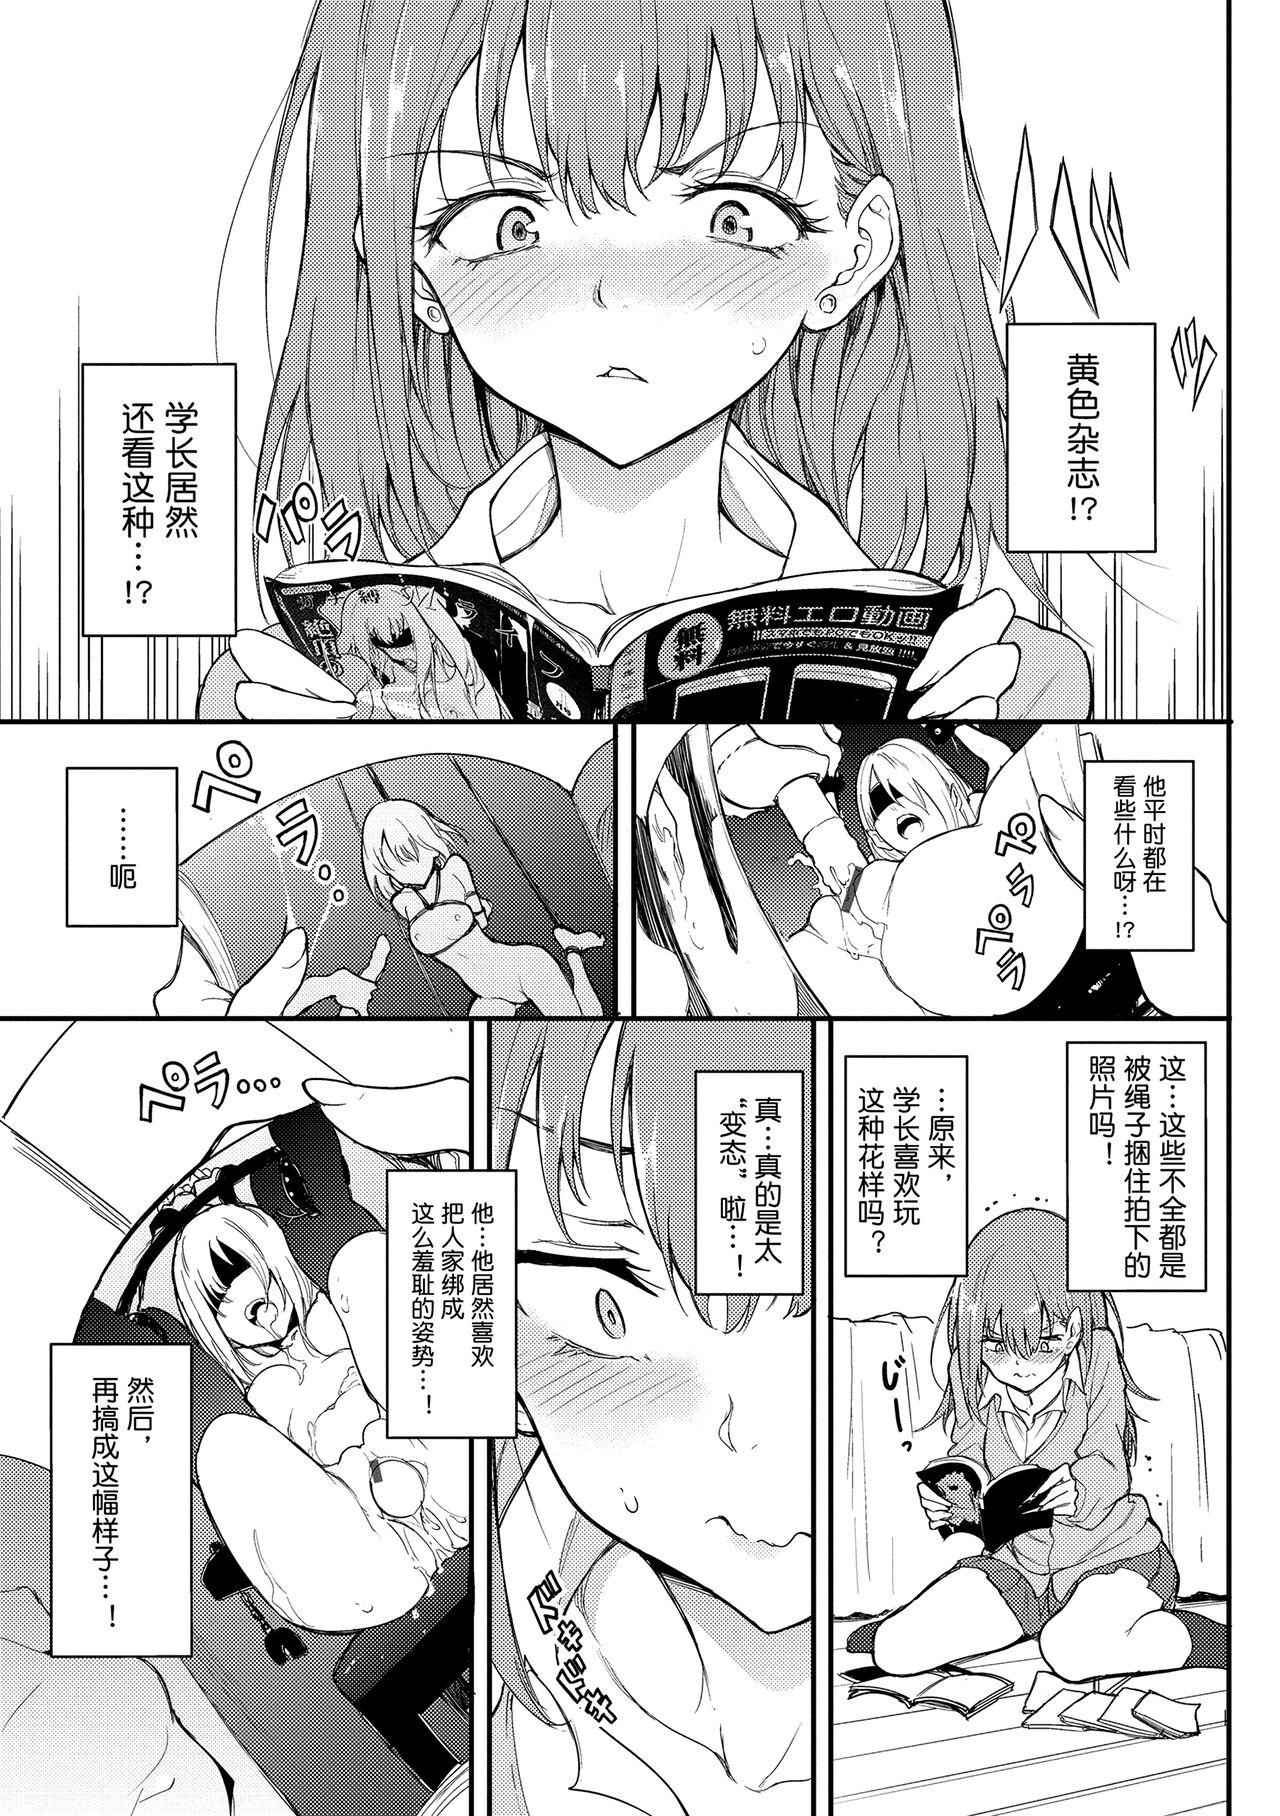 Caseiro Love you | 爱你 Glamour - Page 9